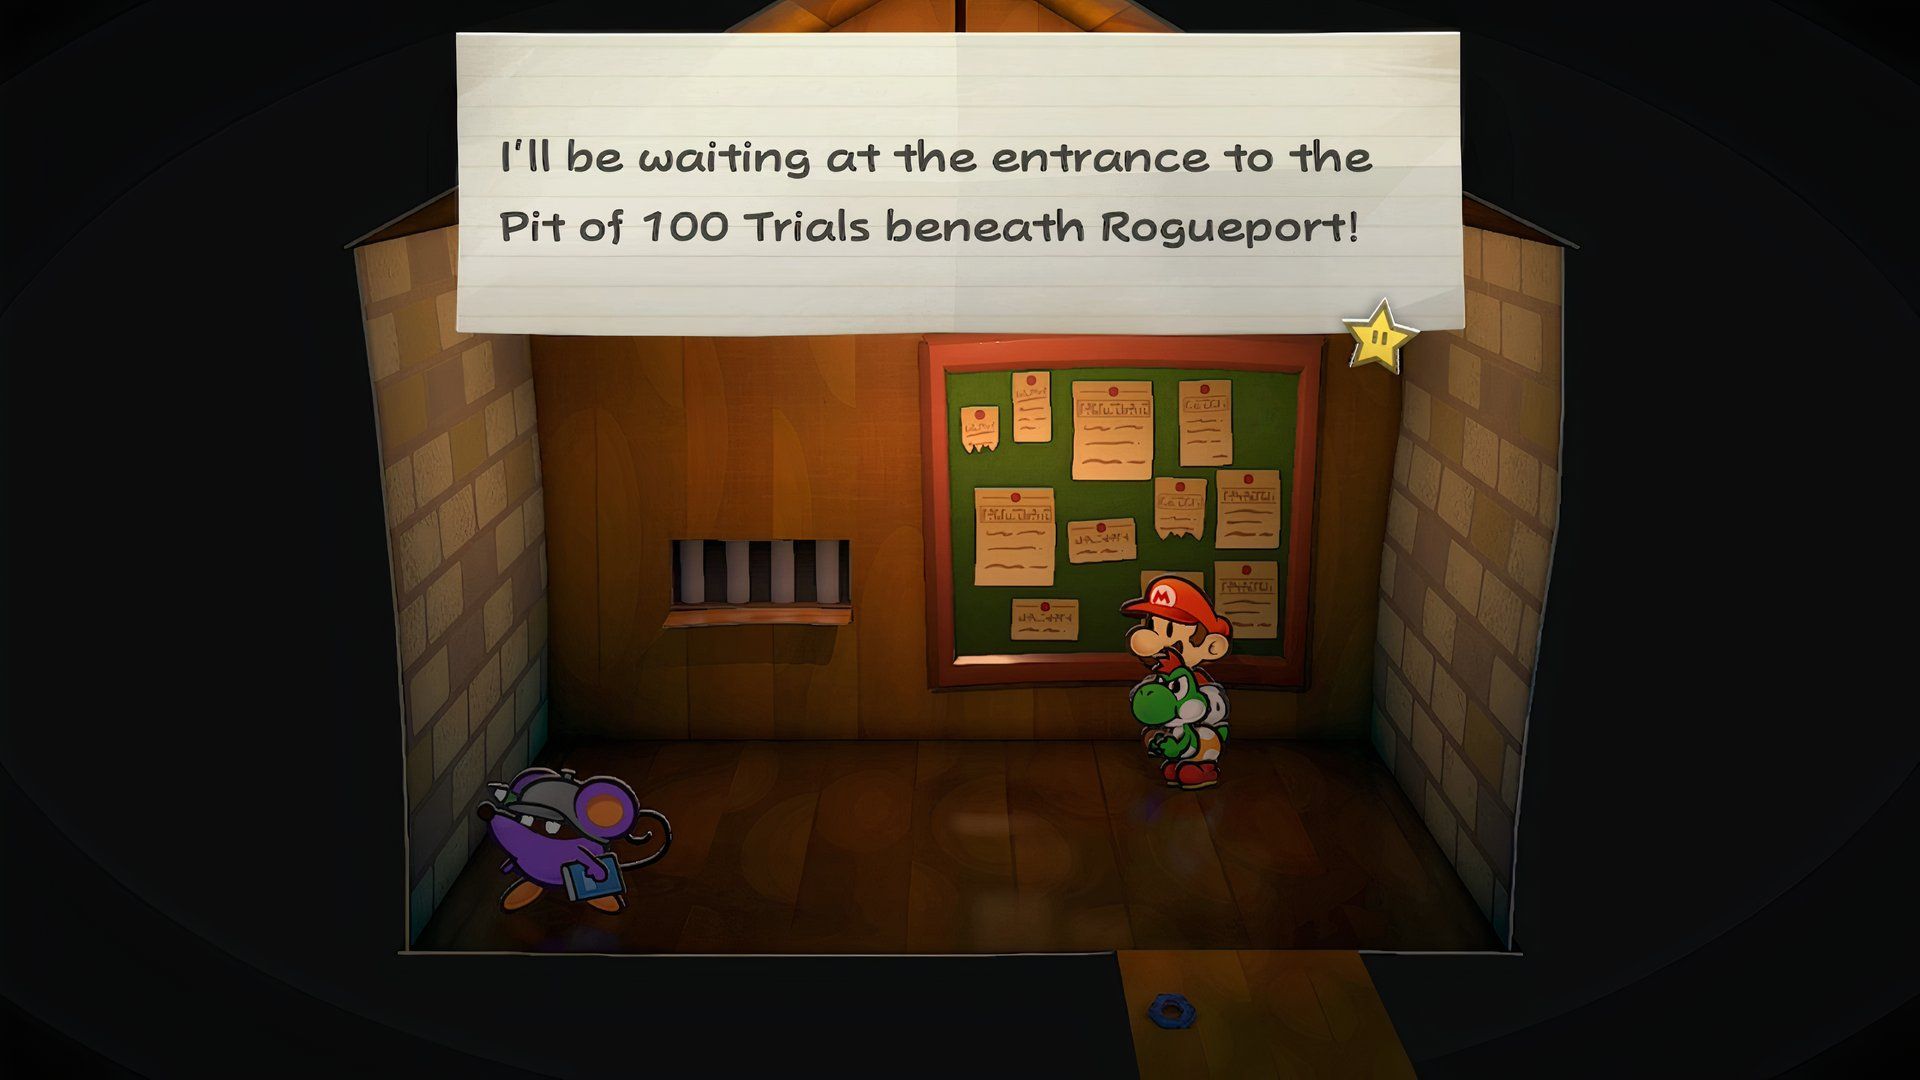 Paper Mario: The Thousand-Year Door - Trouble Center Pit of 100 Trials